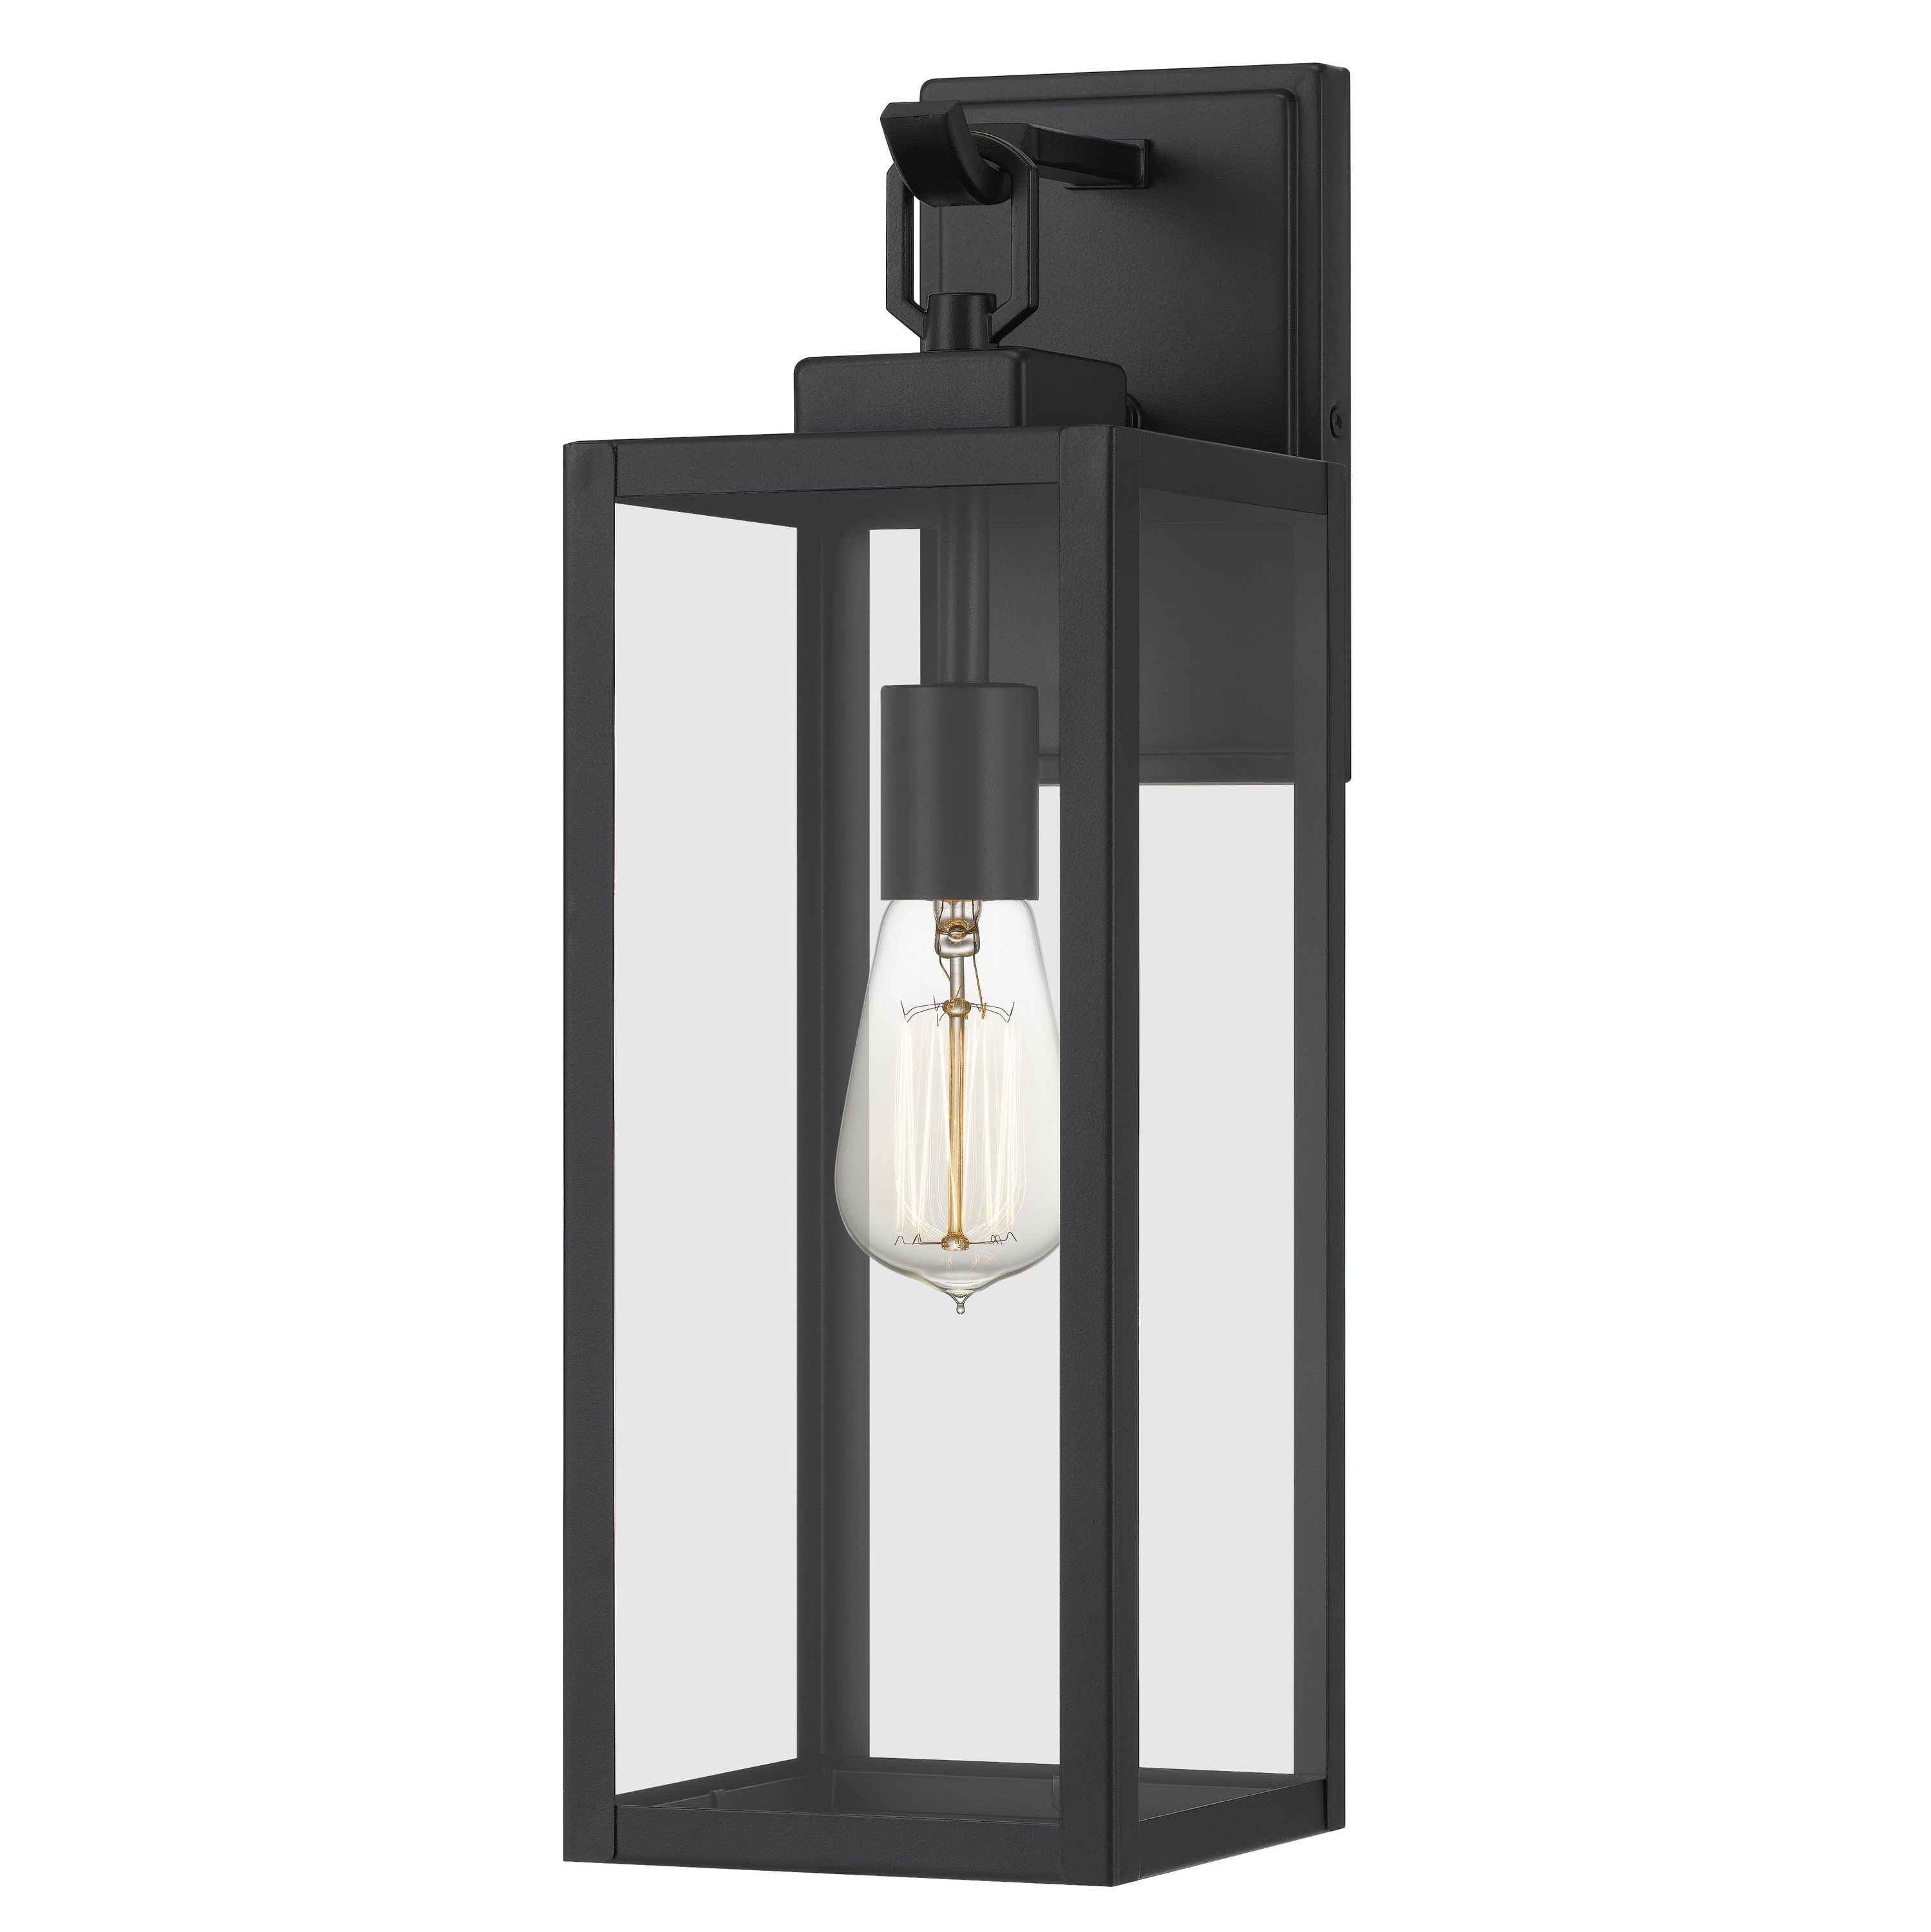 Outdoor Wall Lights At Com, 1 Light Black 18 75 In Outdoor Wall Lantern Sconce With Seeded Glass